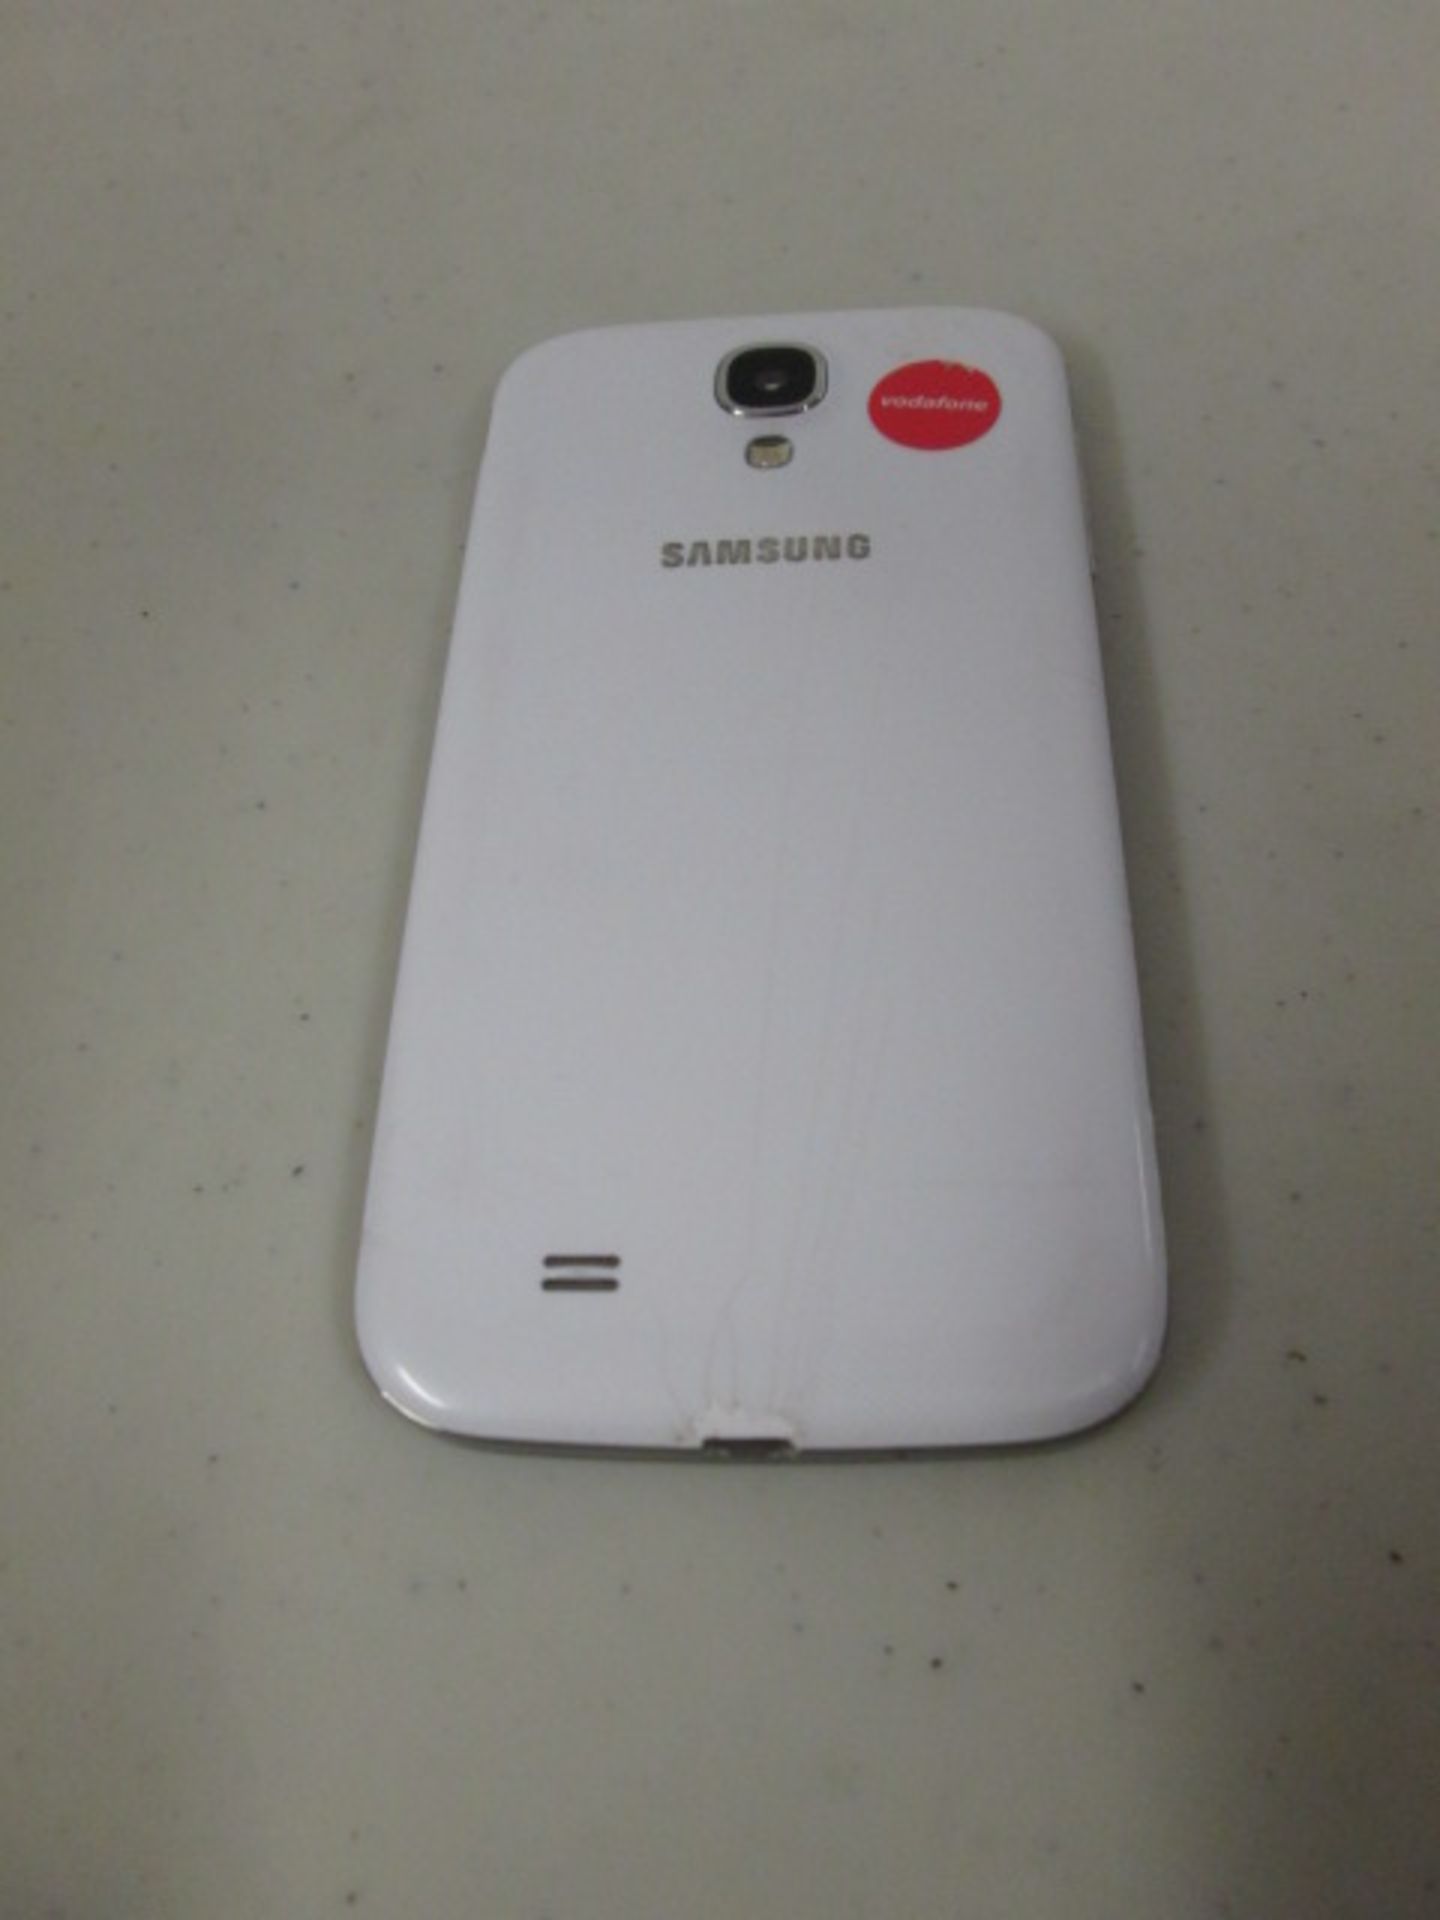 Samsung Galaxy S4 Mobile Phone, Model GT-19505, 16GB. Colour White. Comes with Charger. Locked to - Image 3 of 6